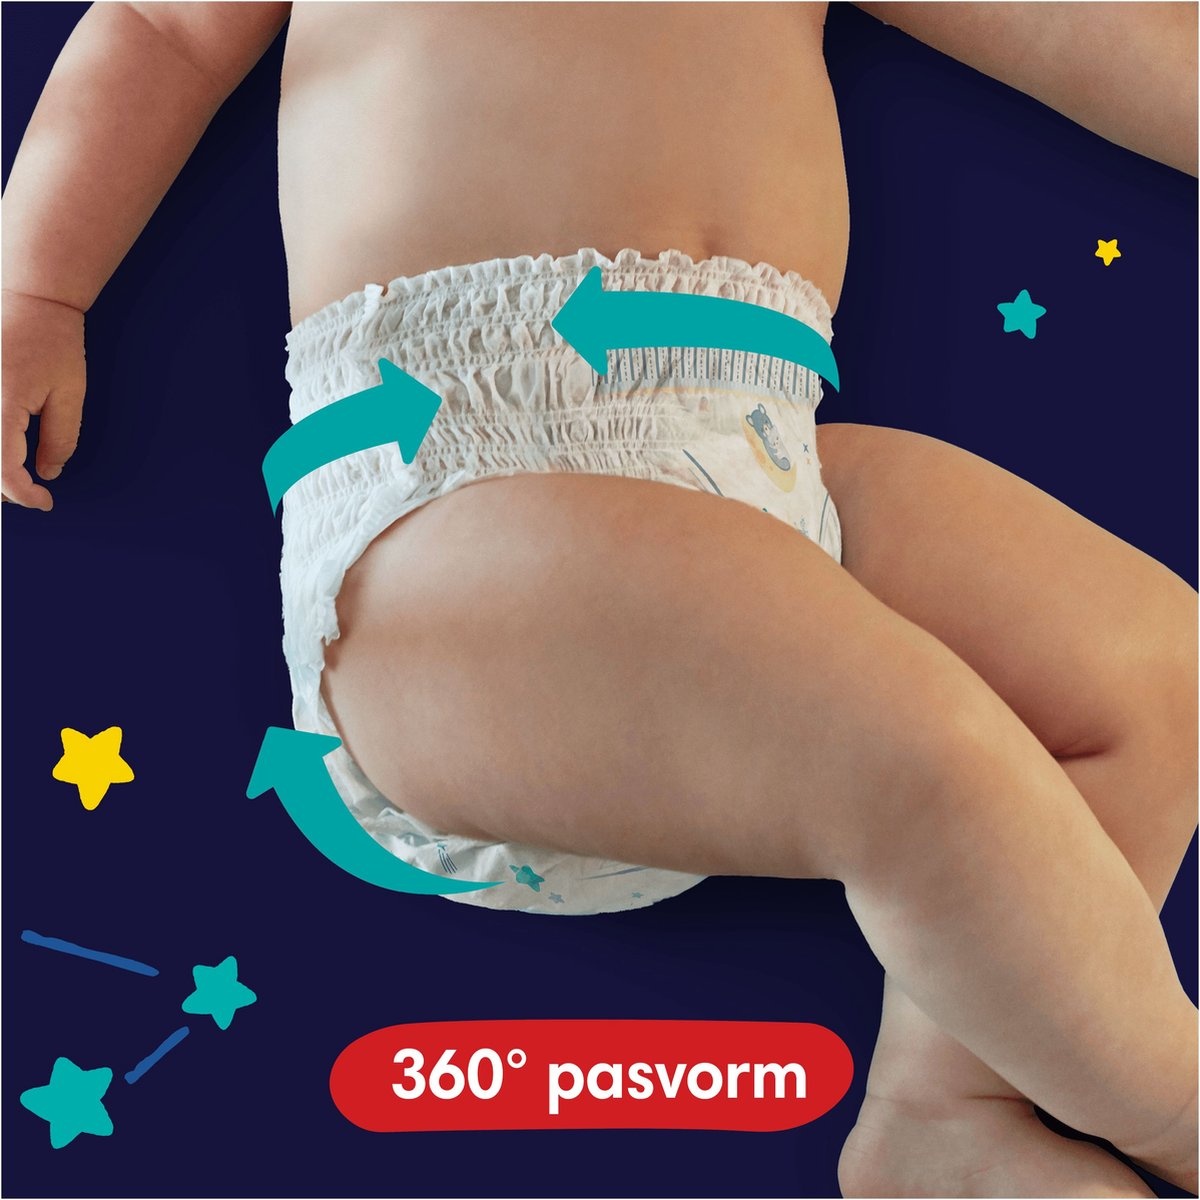 Pampers Baby-Dry Night Pants - Taille 6 (15kg+) - Boîte mensuelle de 138  couches - Emballage endommagé - Onlinevoordeelshop